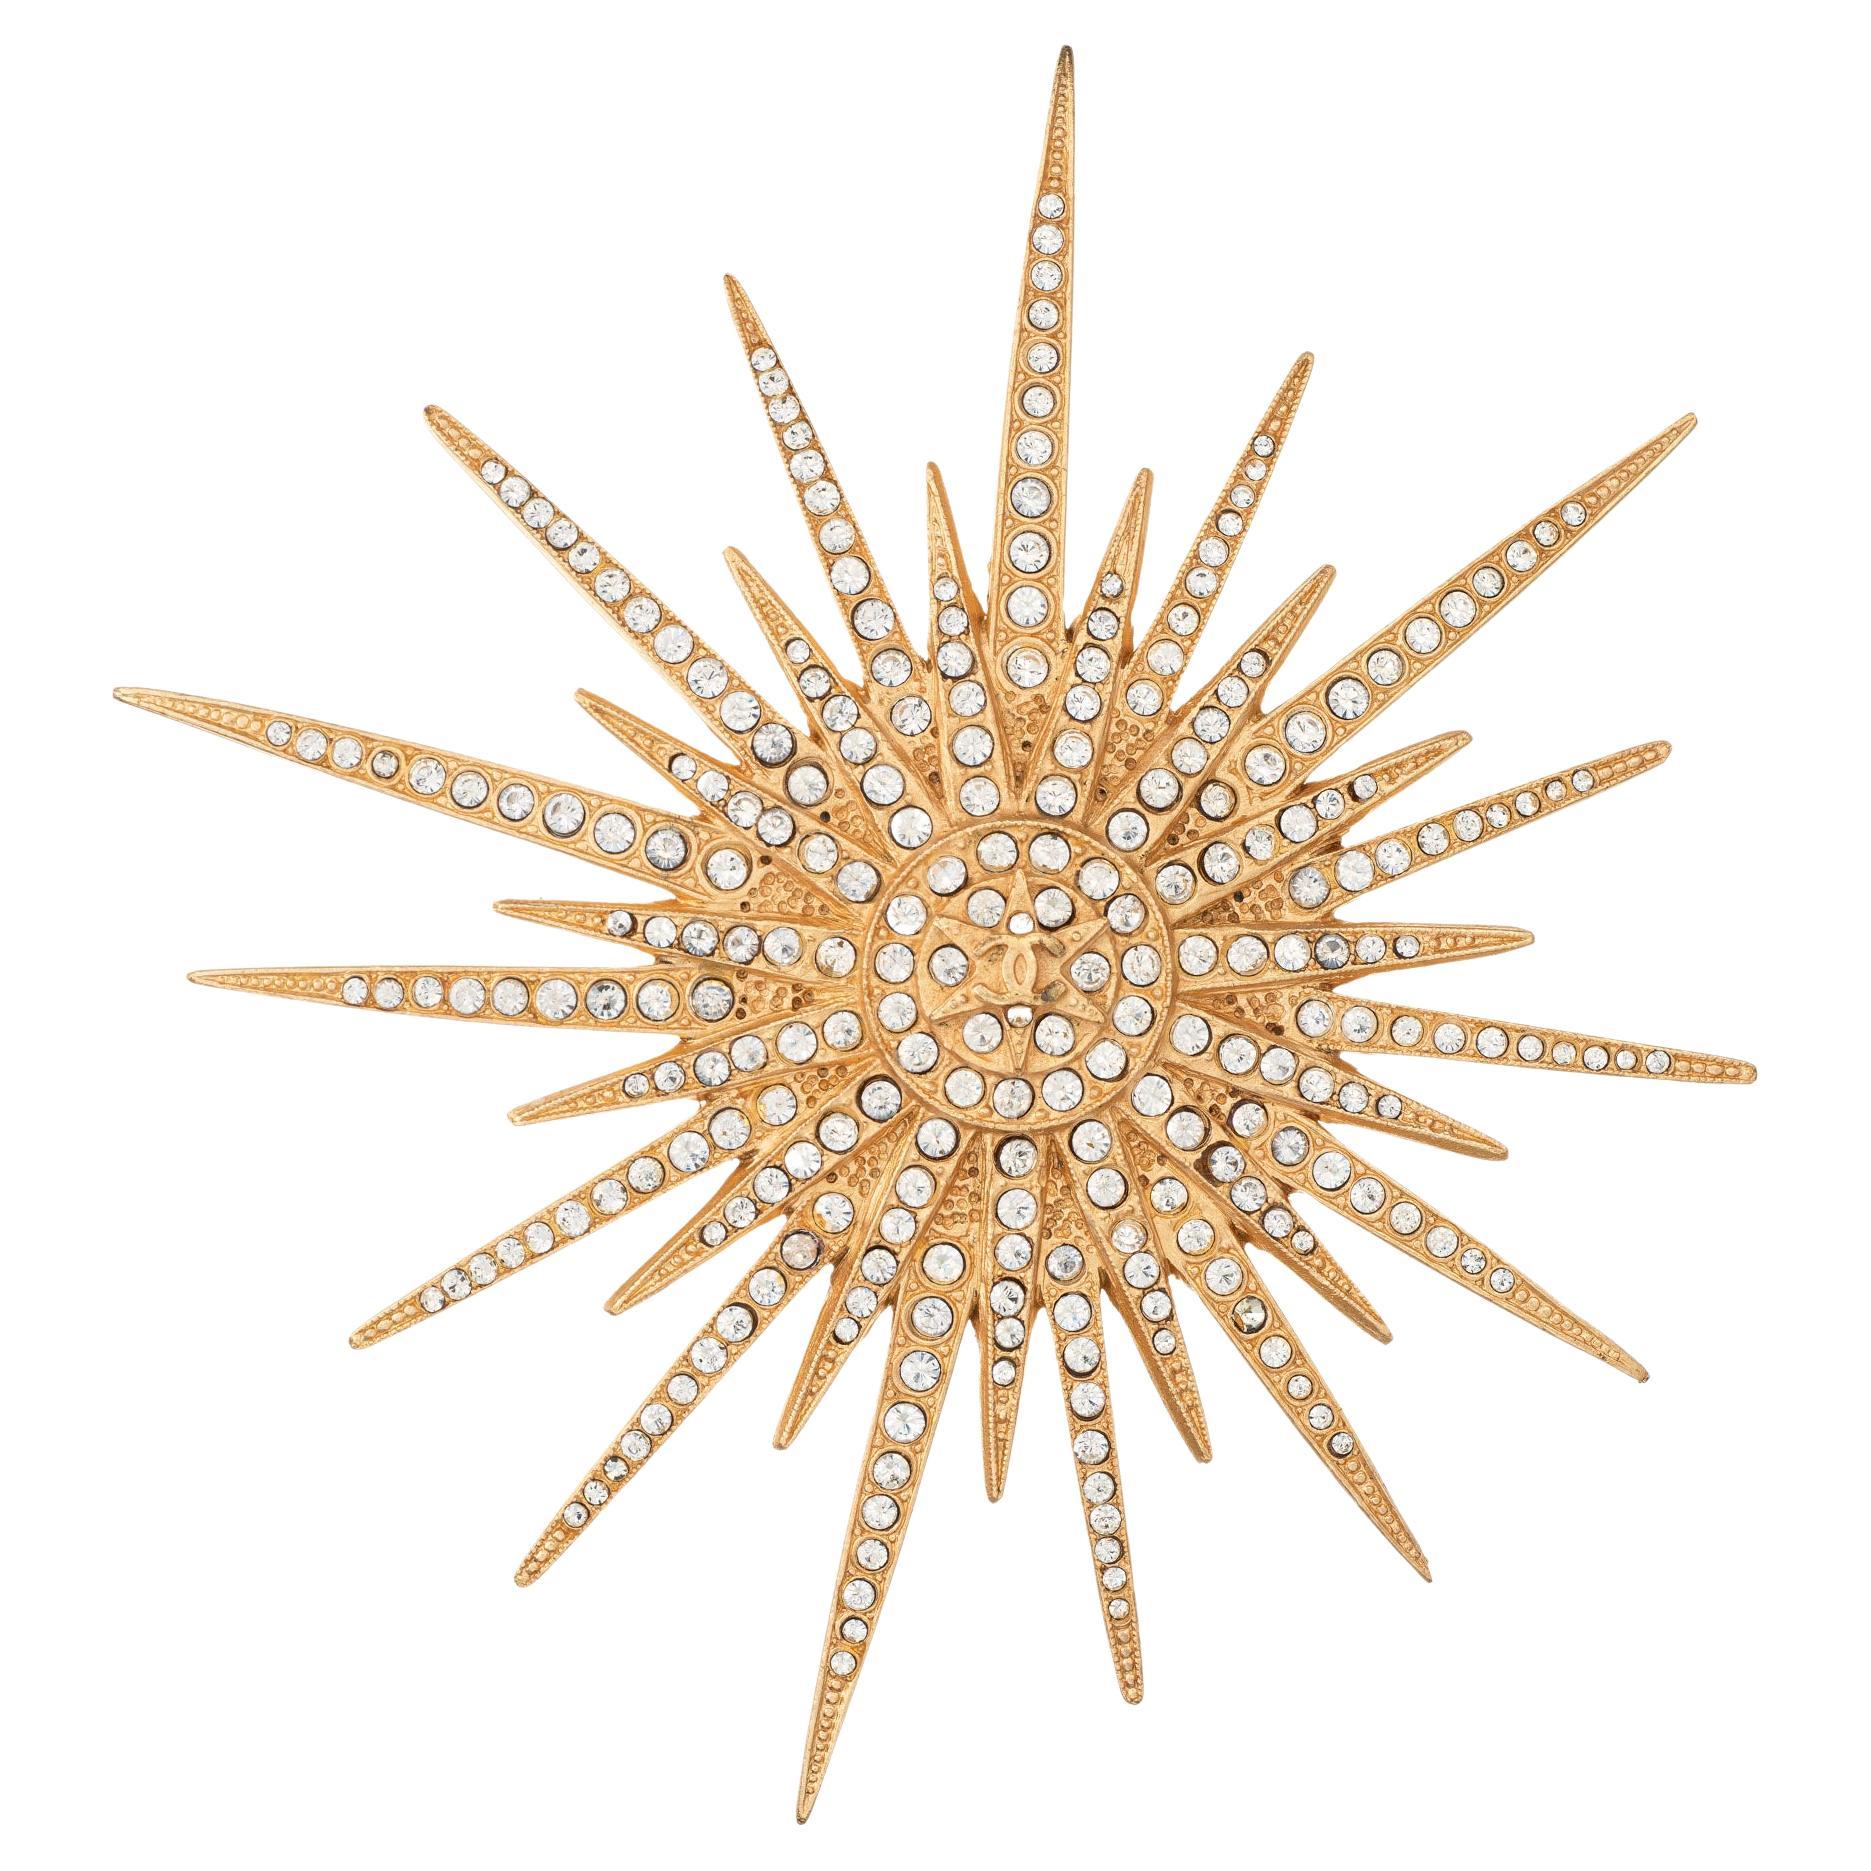 Vintage Chanel Starburst Brooch Pin c2001 Large Crystal Yellow Gold Tone   For Sale